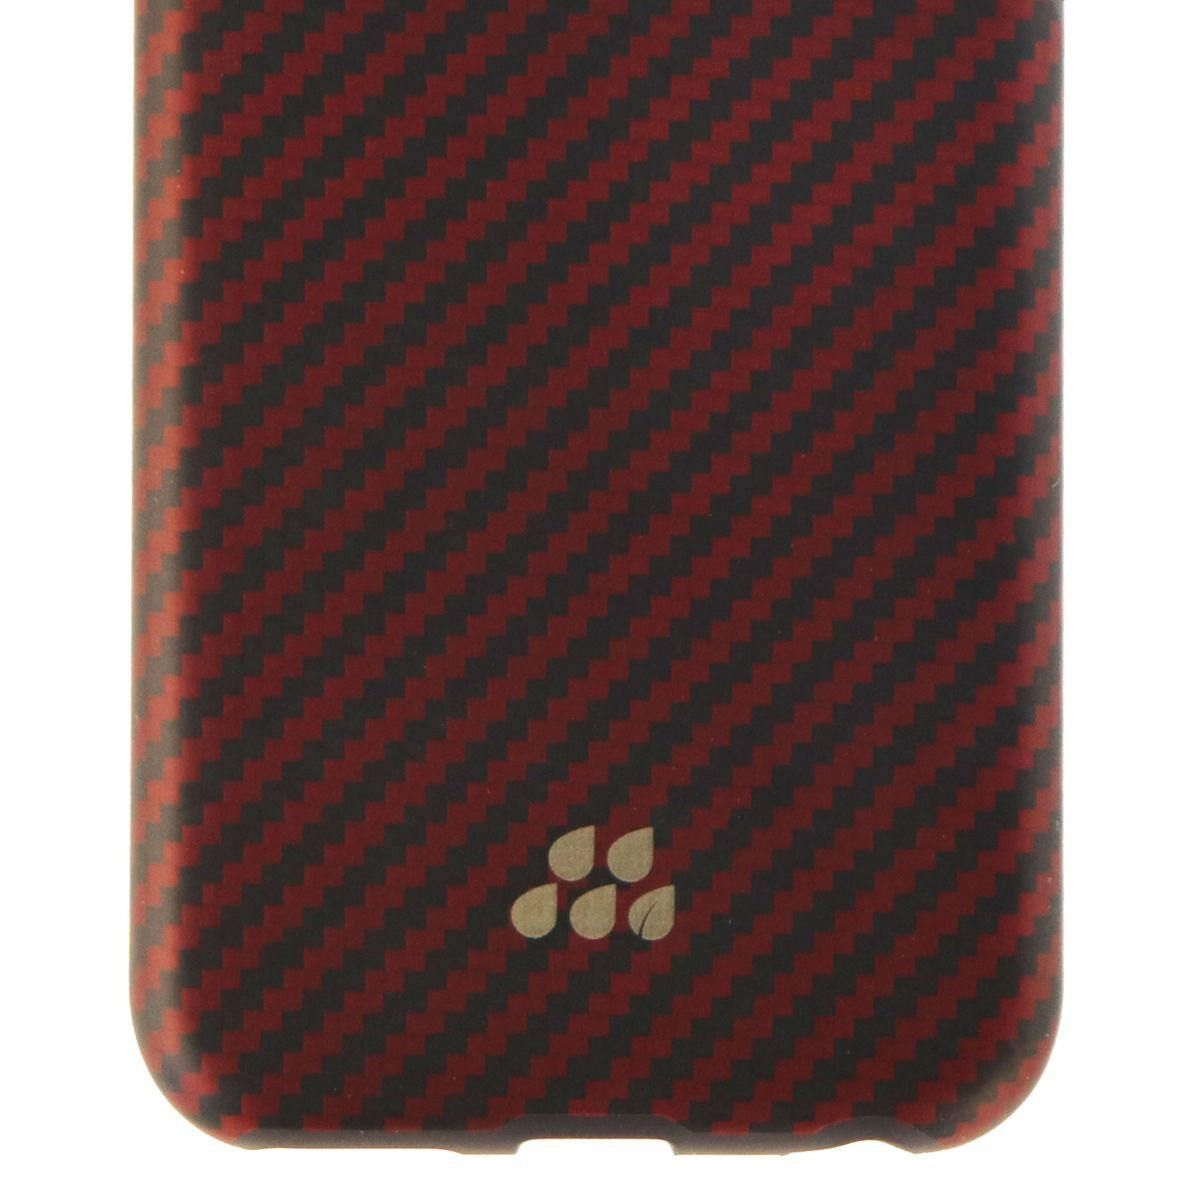 Evutec Karbon SI Kozane Series Hybrid Case for Apple iPhone 6s/6 - Red/Black Cell Phone - Cases, Covers & Skins Evutec    - Simple Cell Bulk Wholesale Pricing - USA Seller